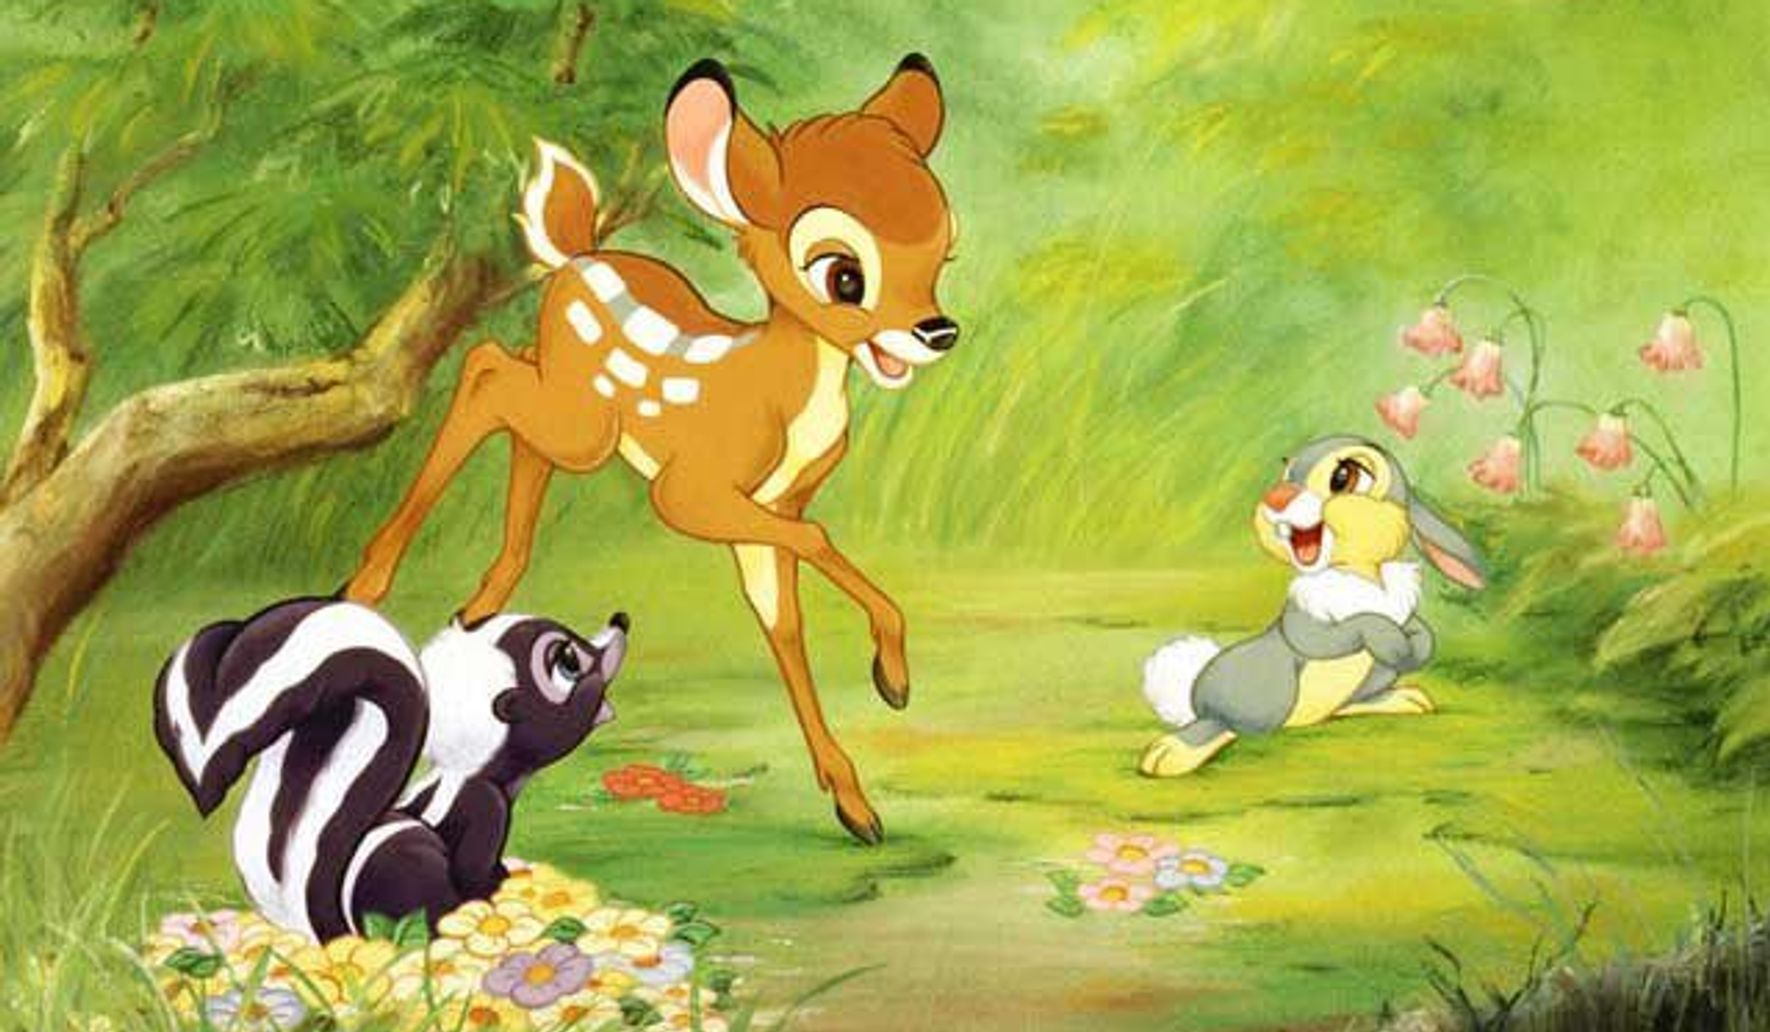 Preparing kids for fate of Bambi's mom a must - Washington Times